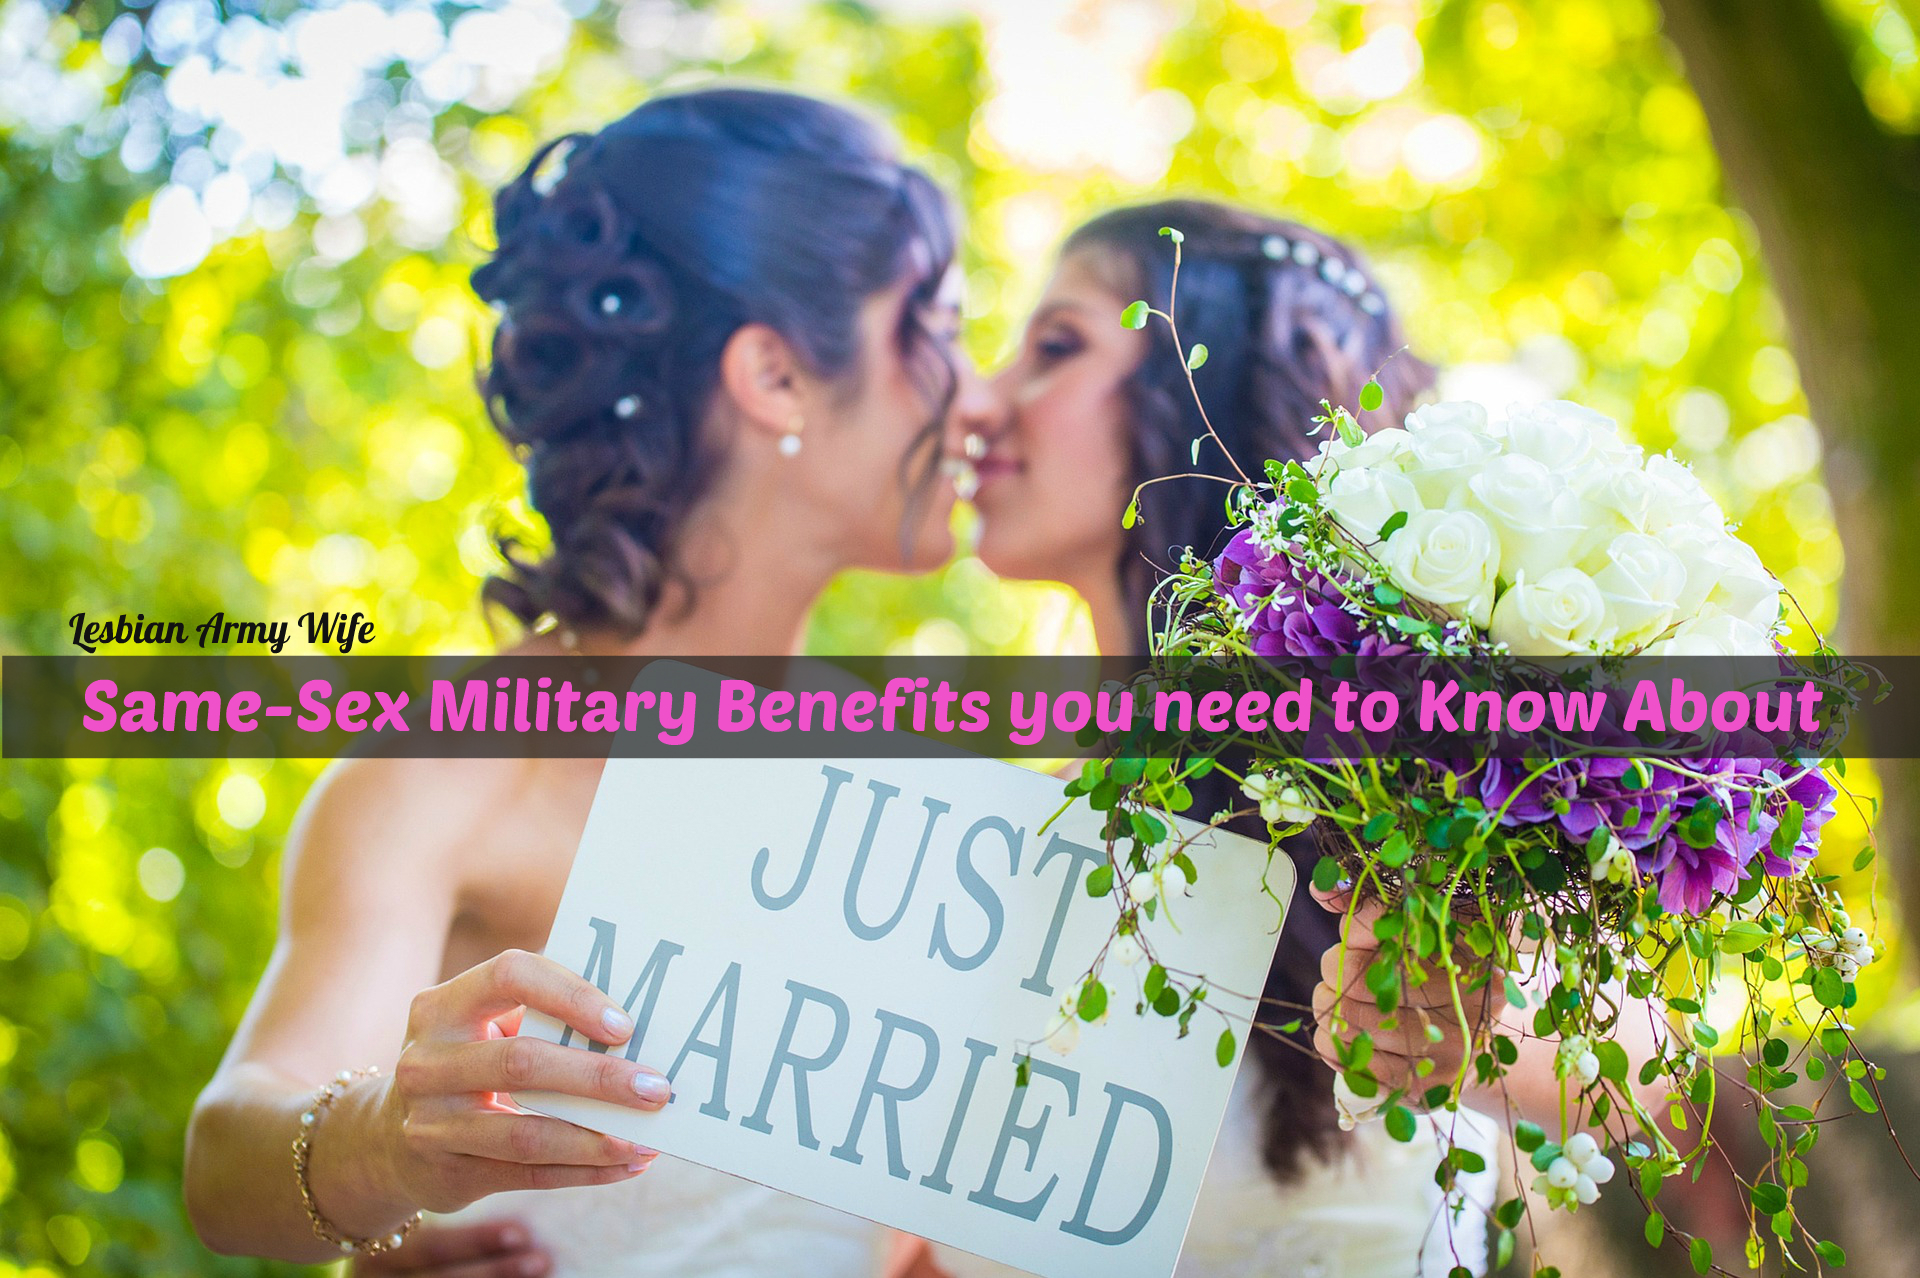 Same-Sex Marriage Military Benefits you need to know about picture